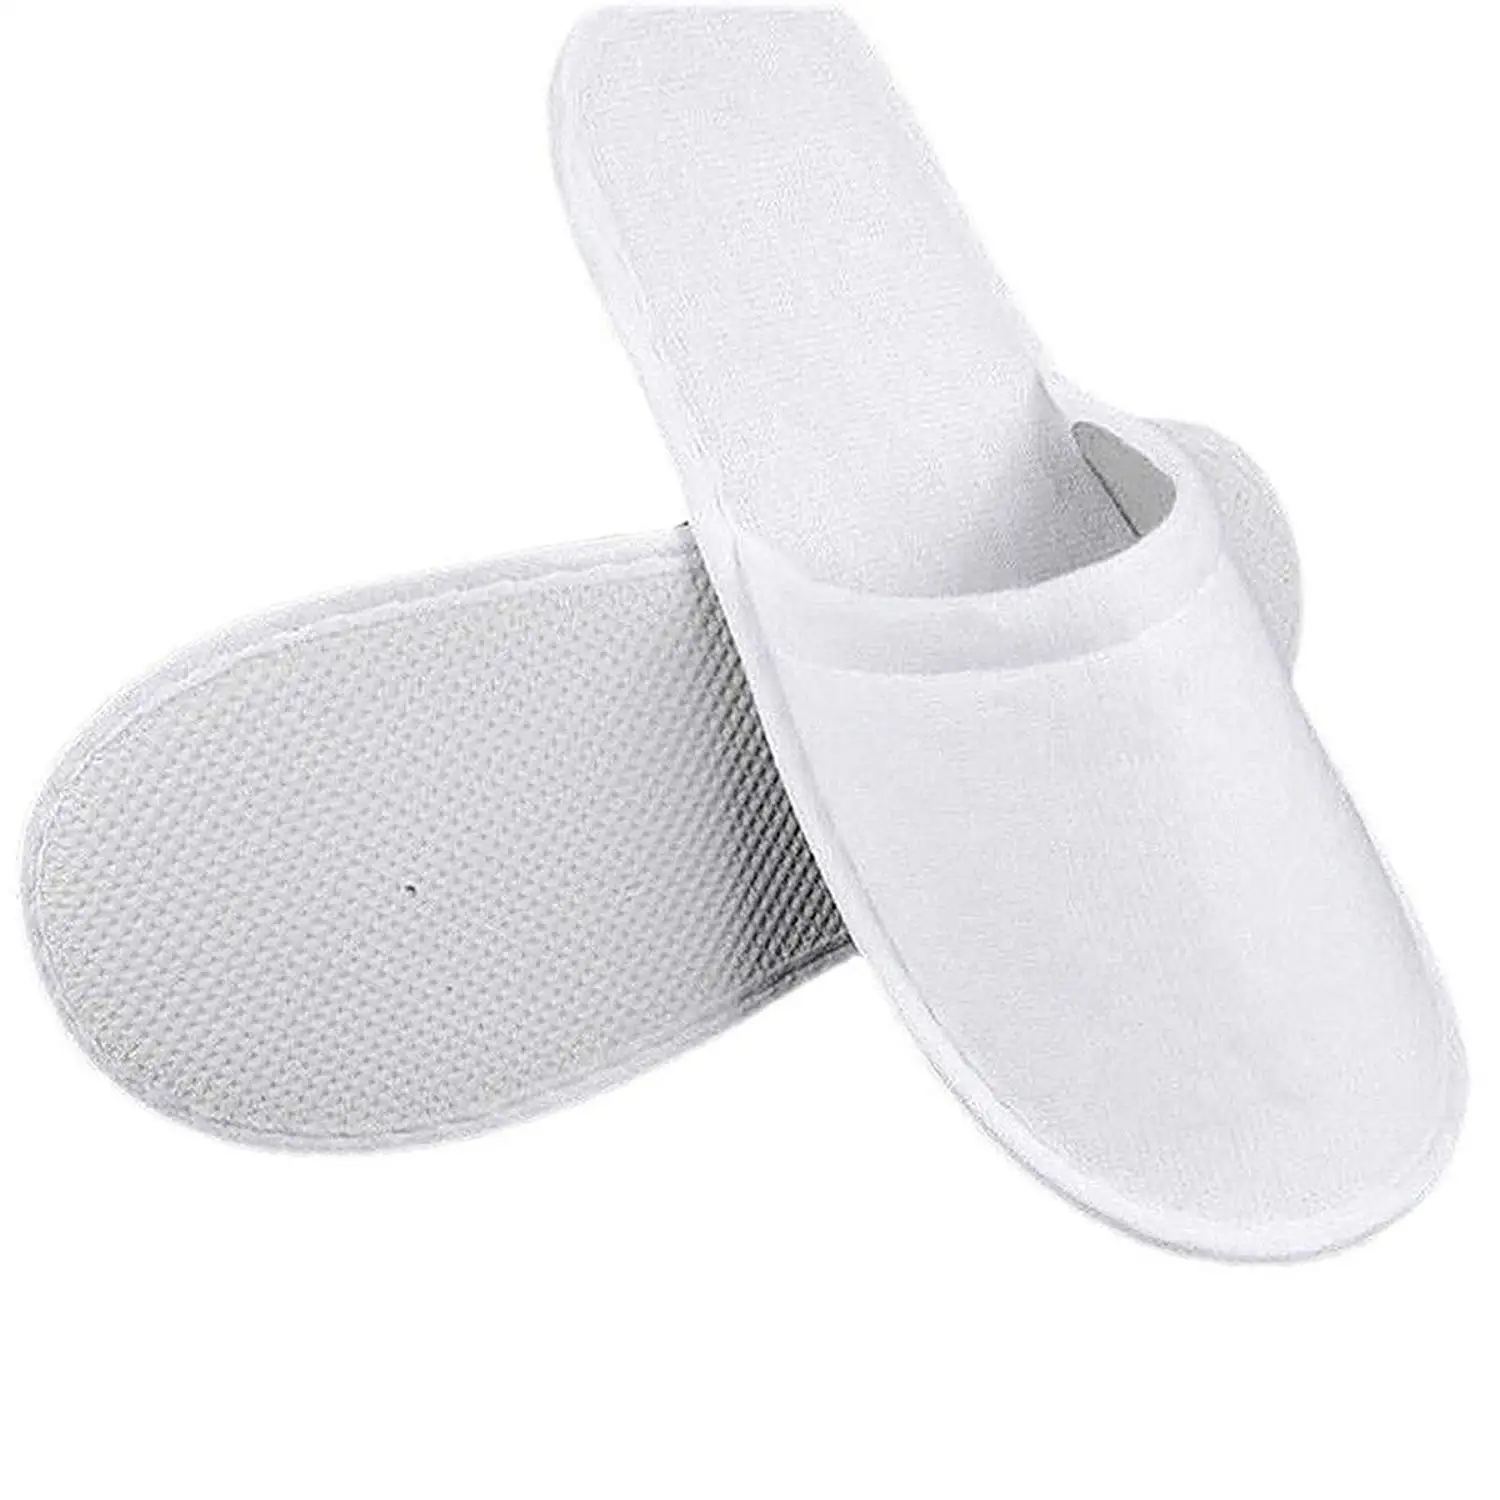 snow paw mens slippers